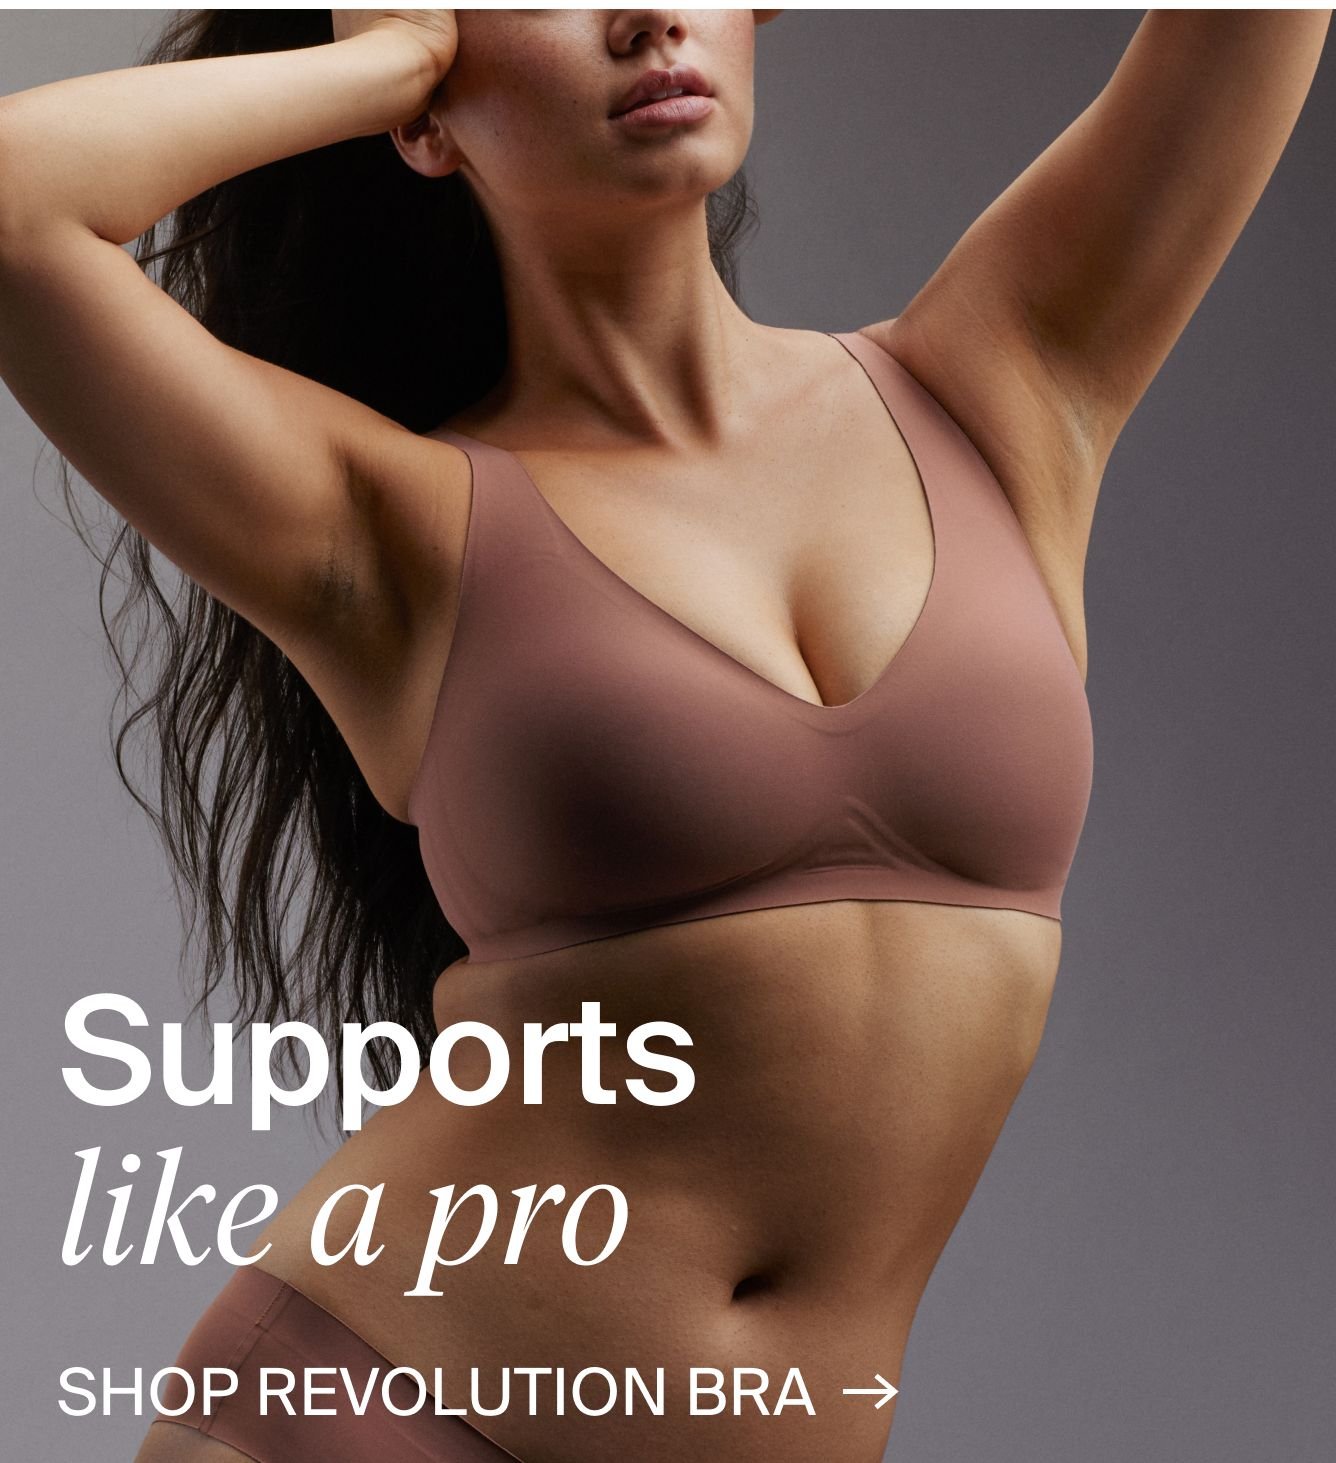 Knix CA: Re: THE BRA that took over 3 years to develop